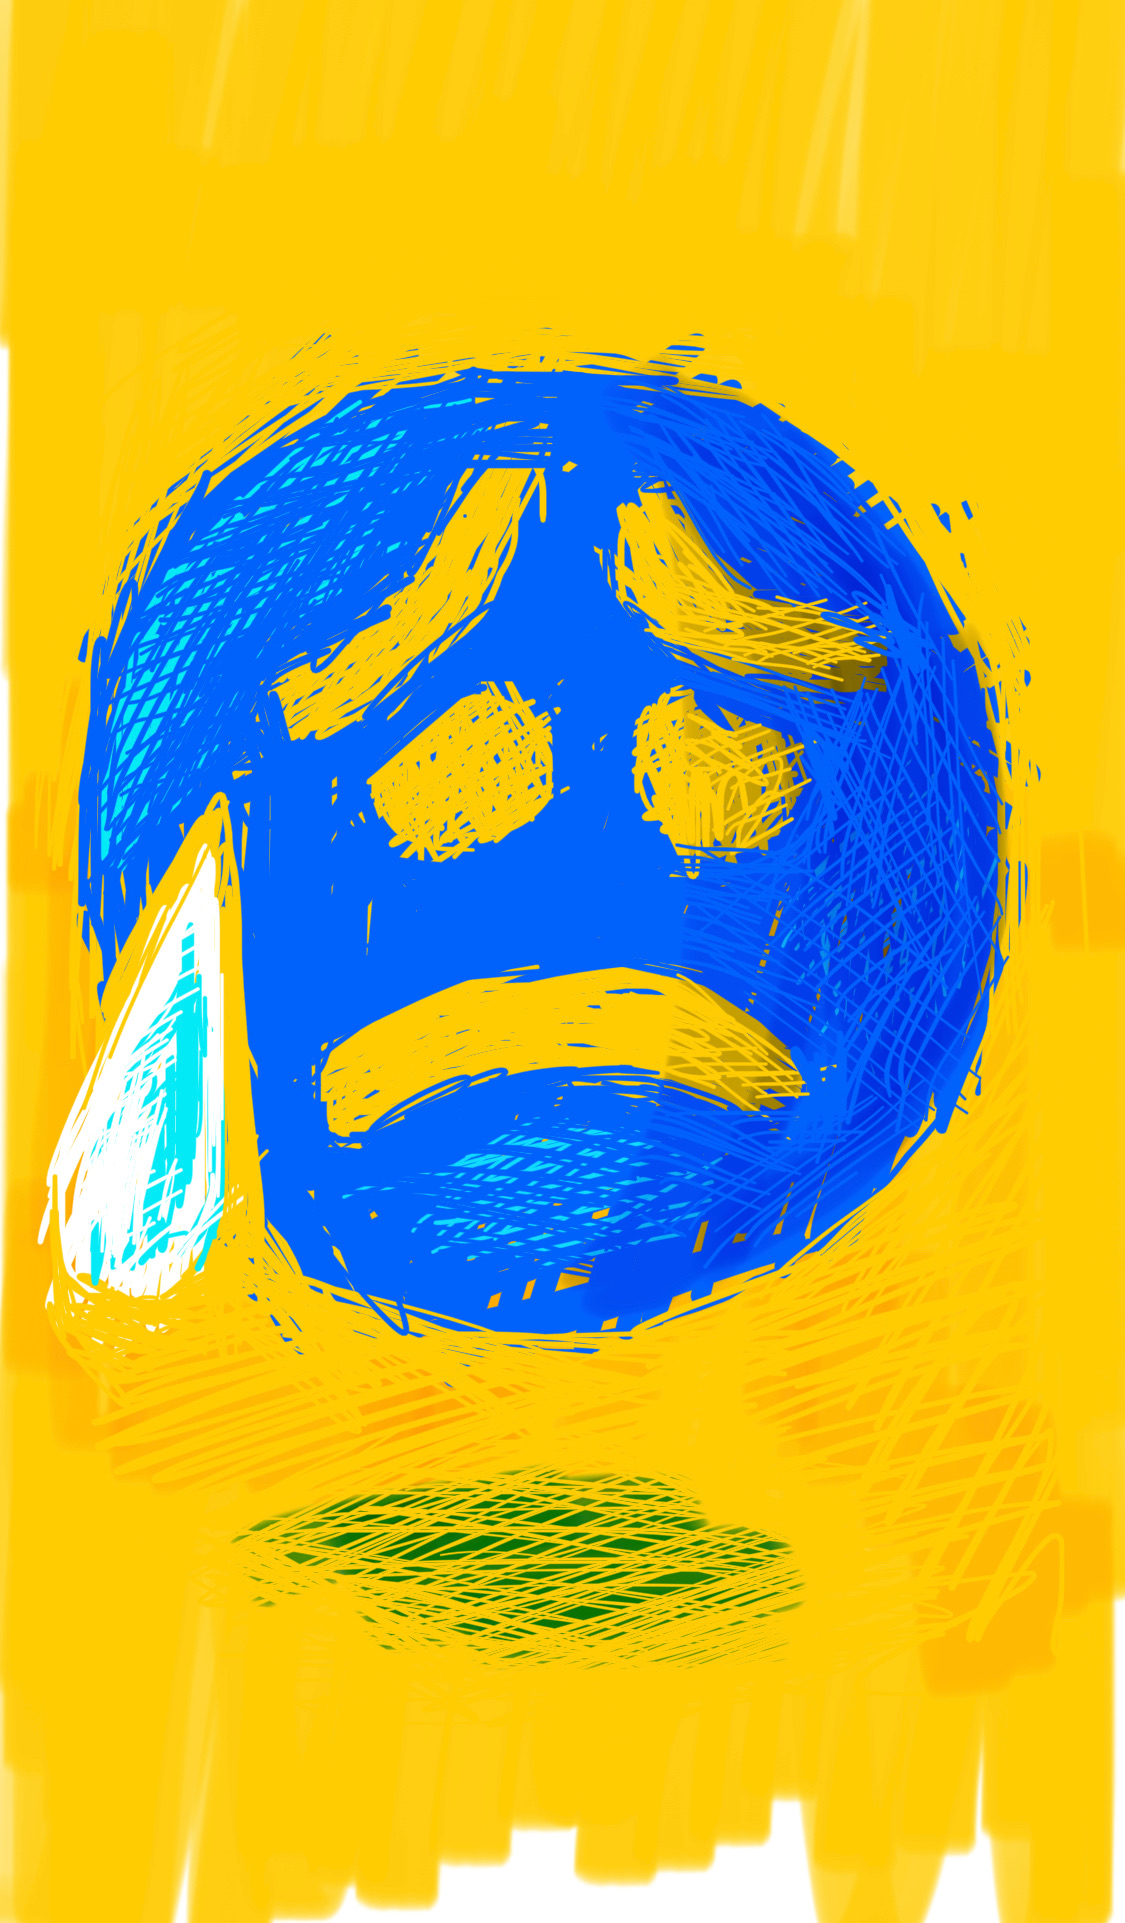 A nervous blue sweating emoji face on a yellow background